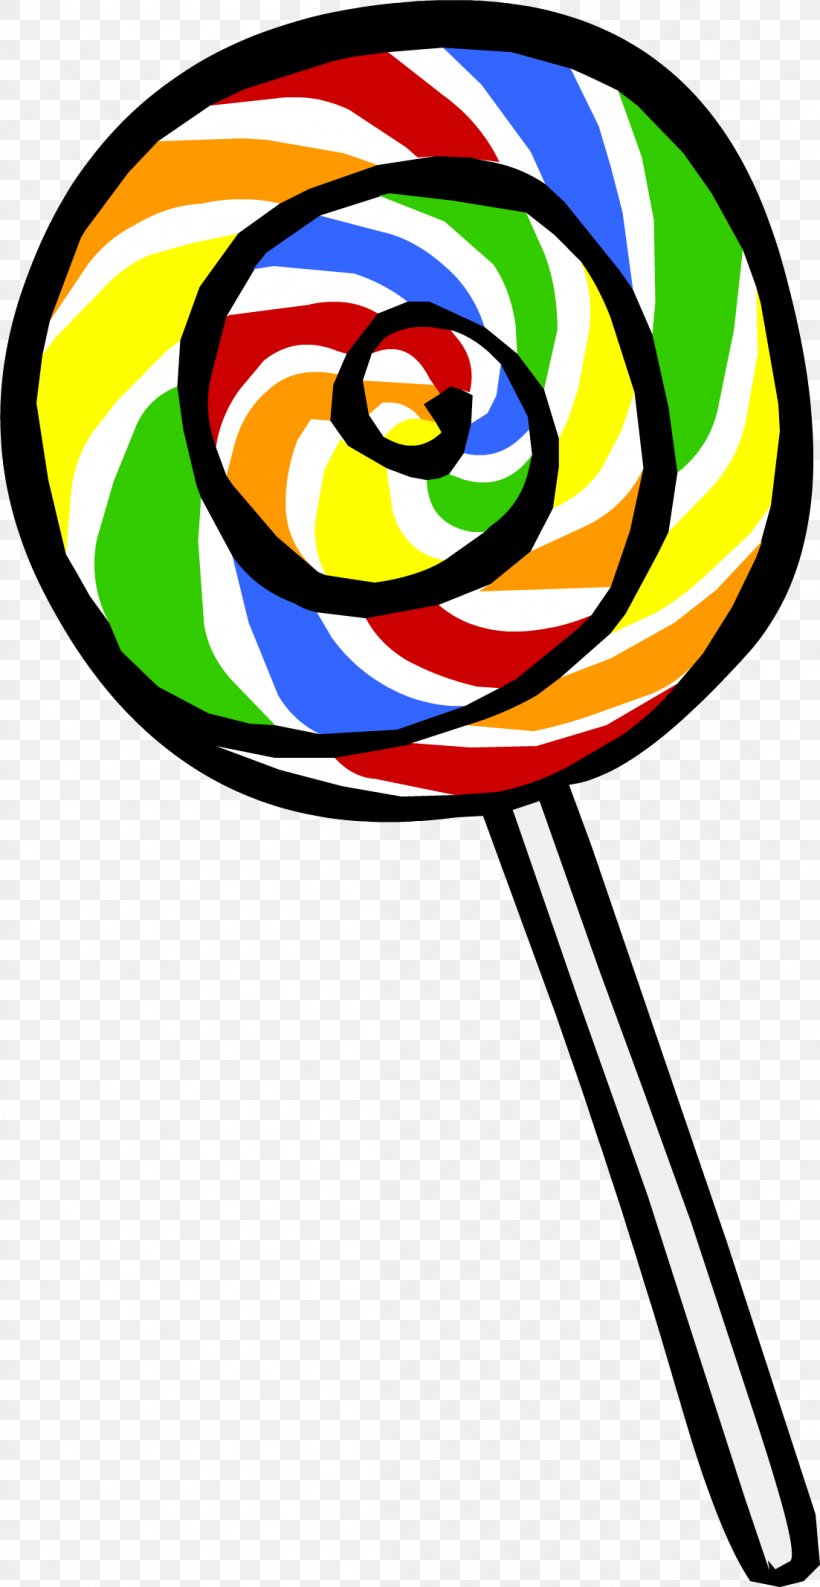 Club Penguin Lollipop Candy Clip Art, PNG, 1103x2136px, Club Penguin, Artwork, Candy, Chocolate, Chupa Chups Download Free